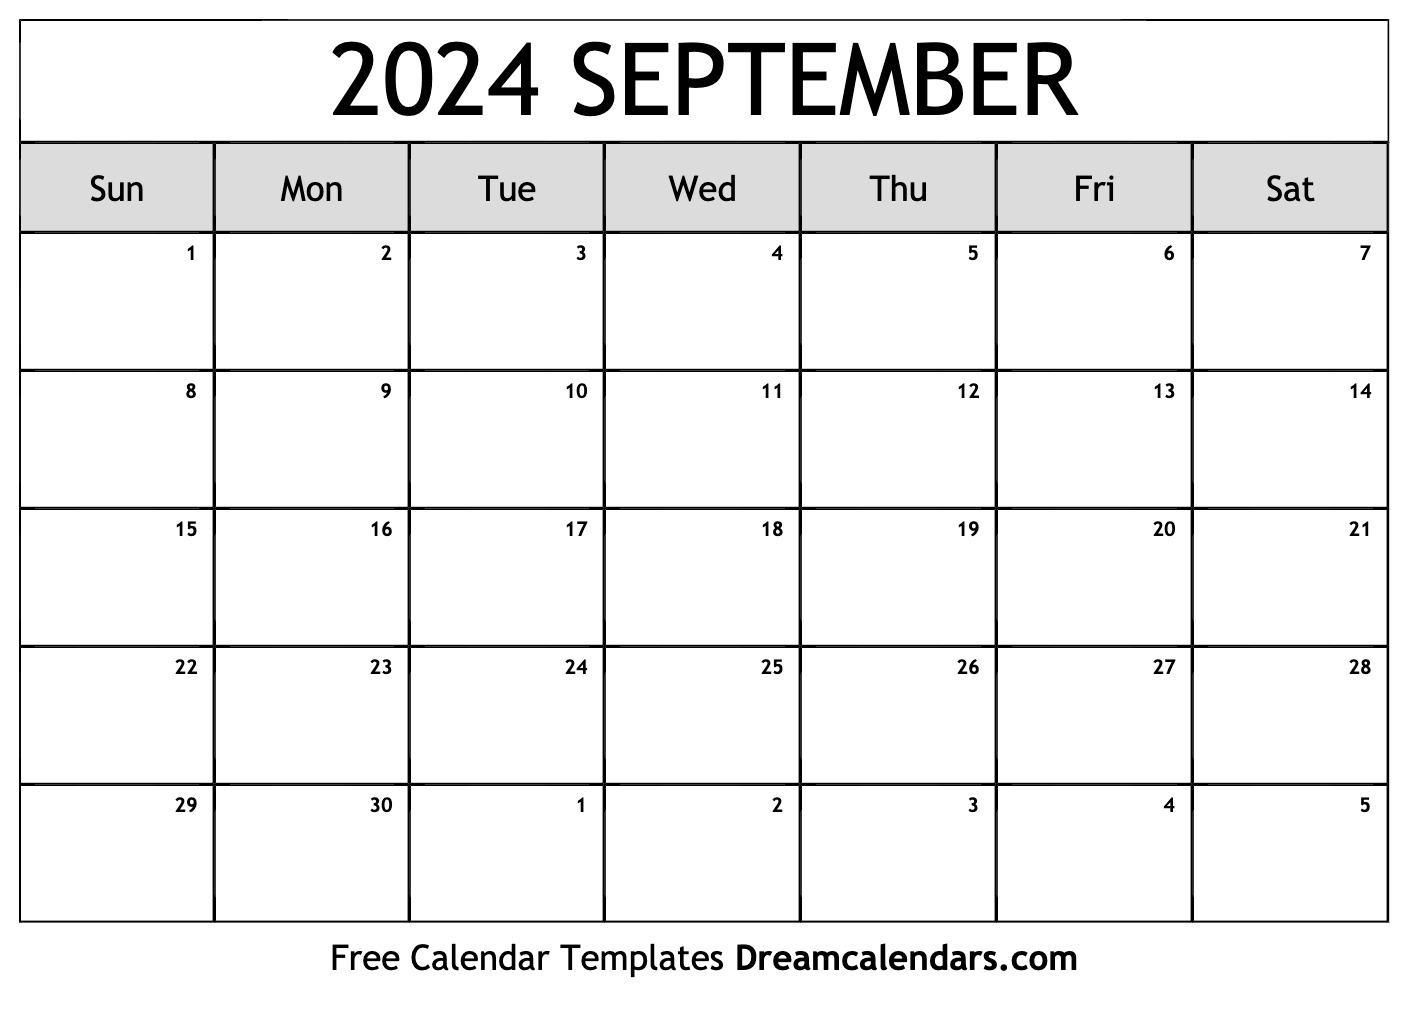 September 2024 Calendar | Free Blank Printable With Holidays pertaining to Free Printable Calendar August And September 2024